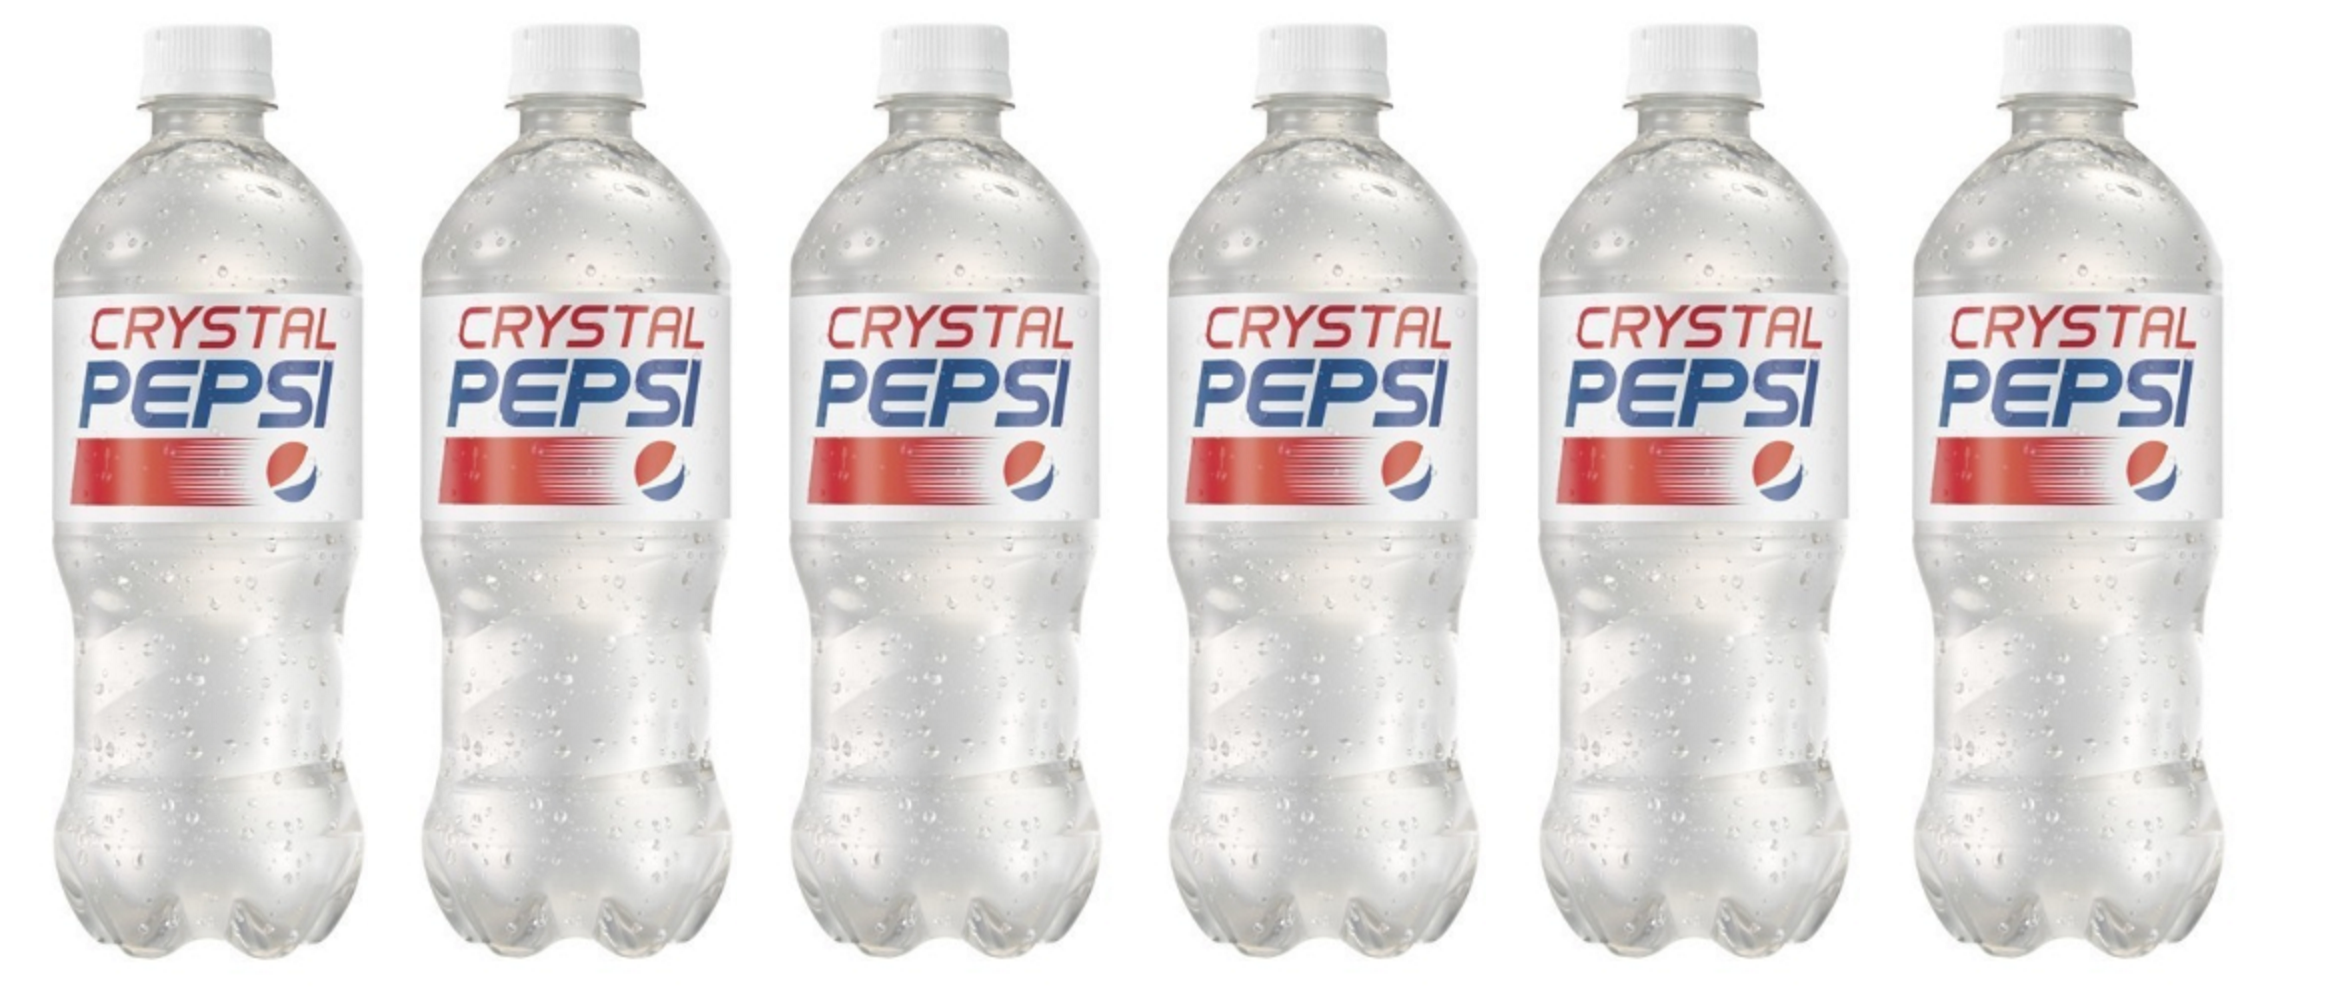 It’s True: Crystal Pepsi Is Coming Back For All Those People Who Forgot They Hated It The First Time Around